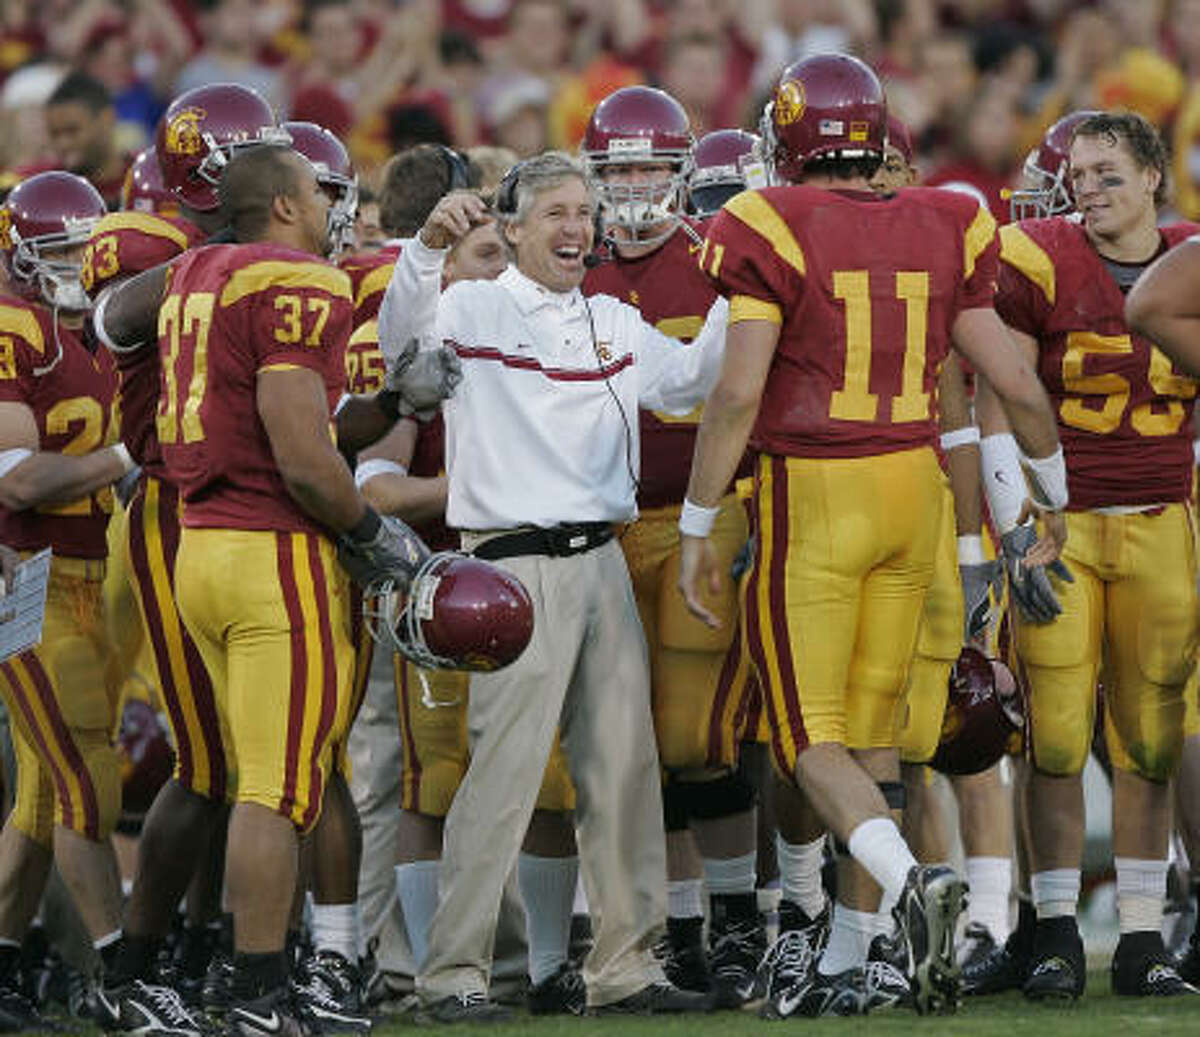 Pete Carroll, center, has been the face of USC football since 2001, during which time he has coached three Heisman Trophy winners, including quarterback Matt Leinart (11), won a BCS crown plus a writers' title, compiled a 34-game win streak and won games over 37 ranked opponents.